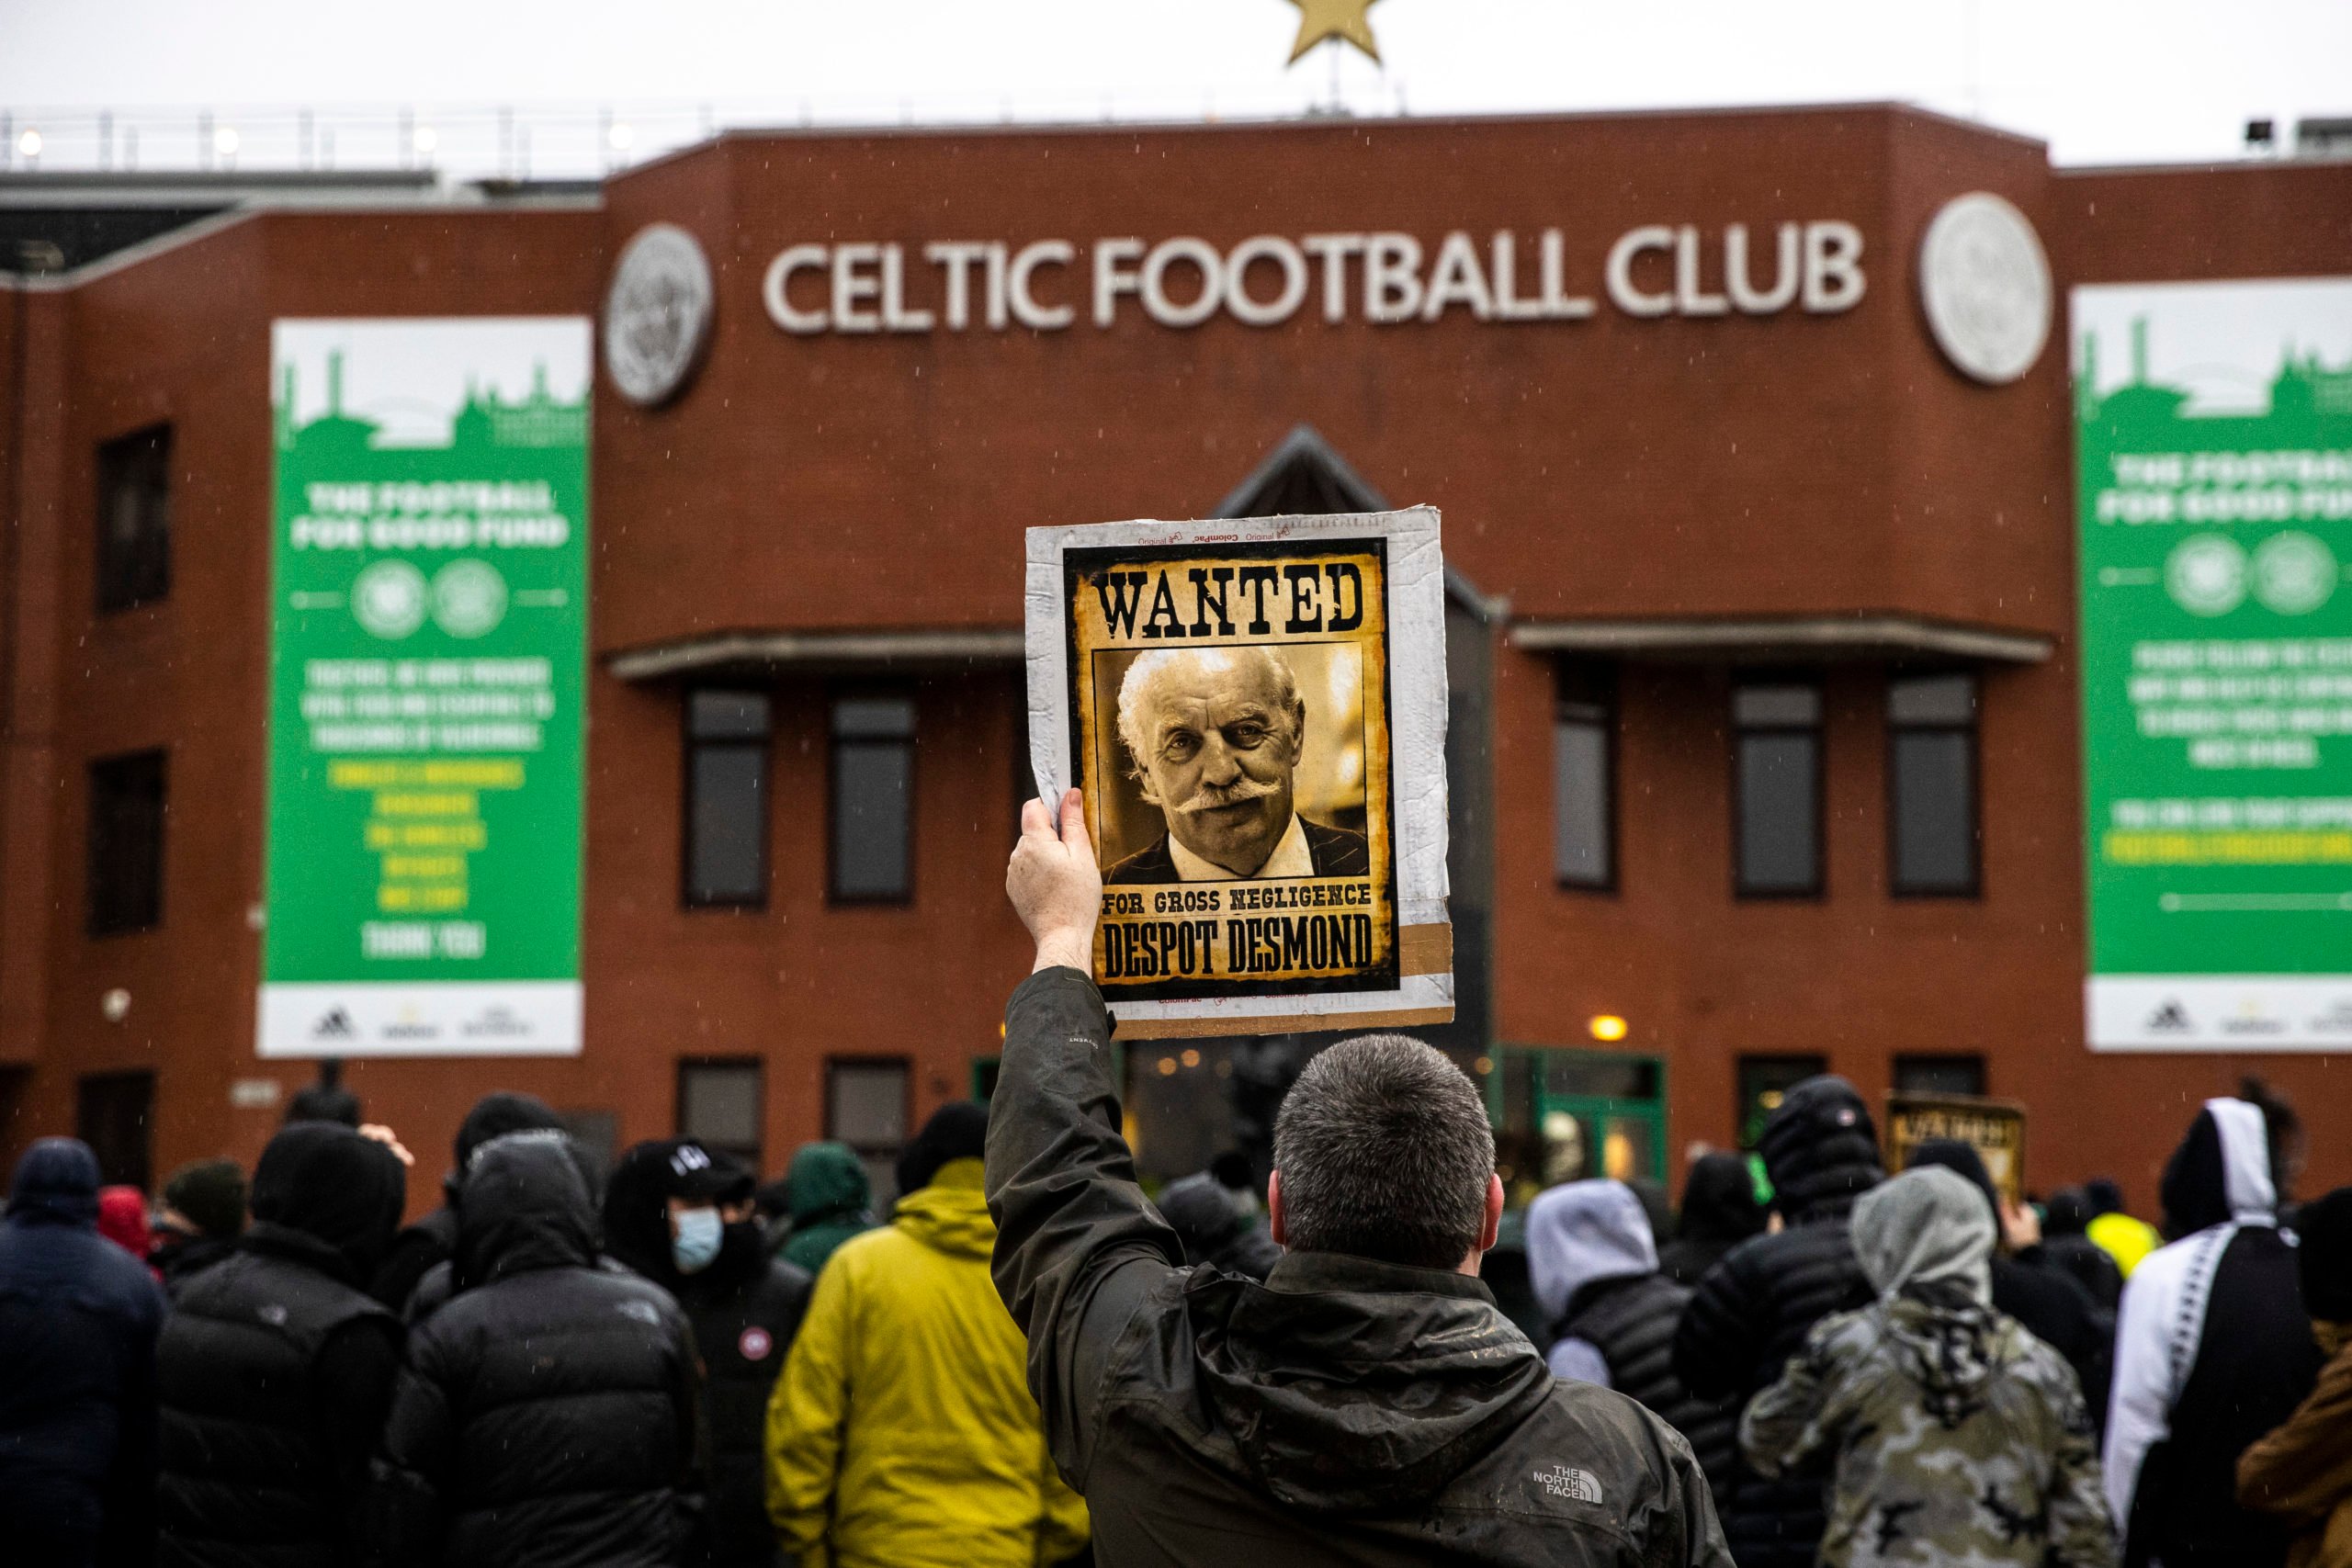 Truncated Celtic meeting failed to address concerns of worried supporters; still stuck in the past